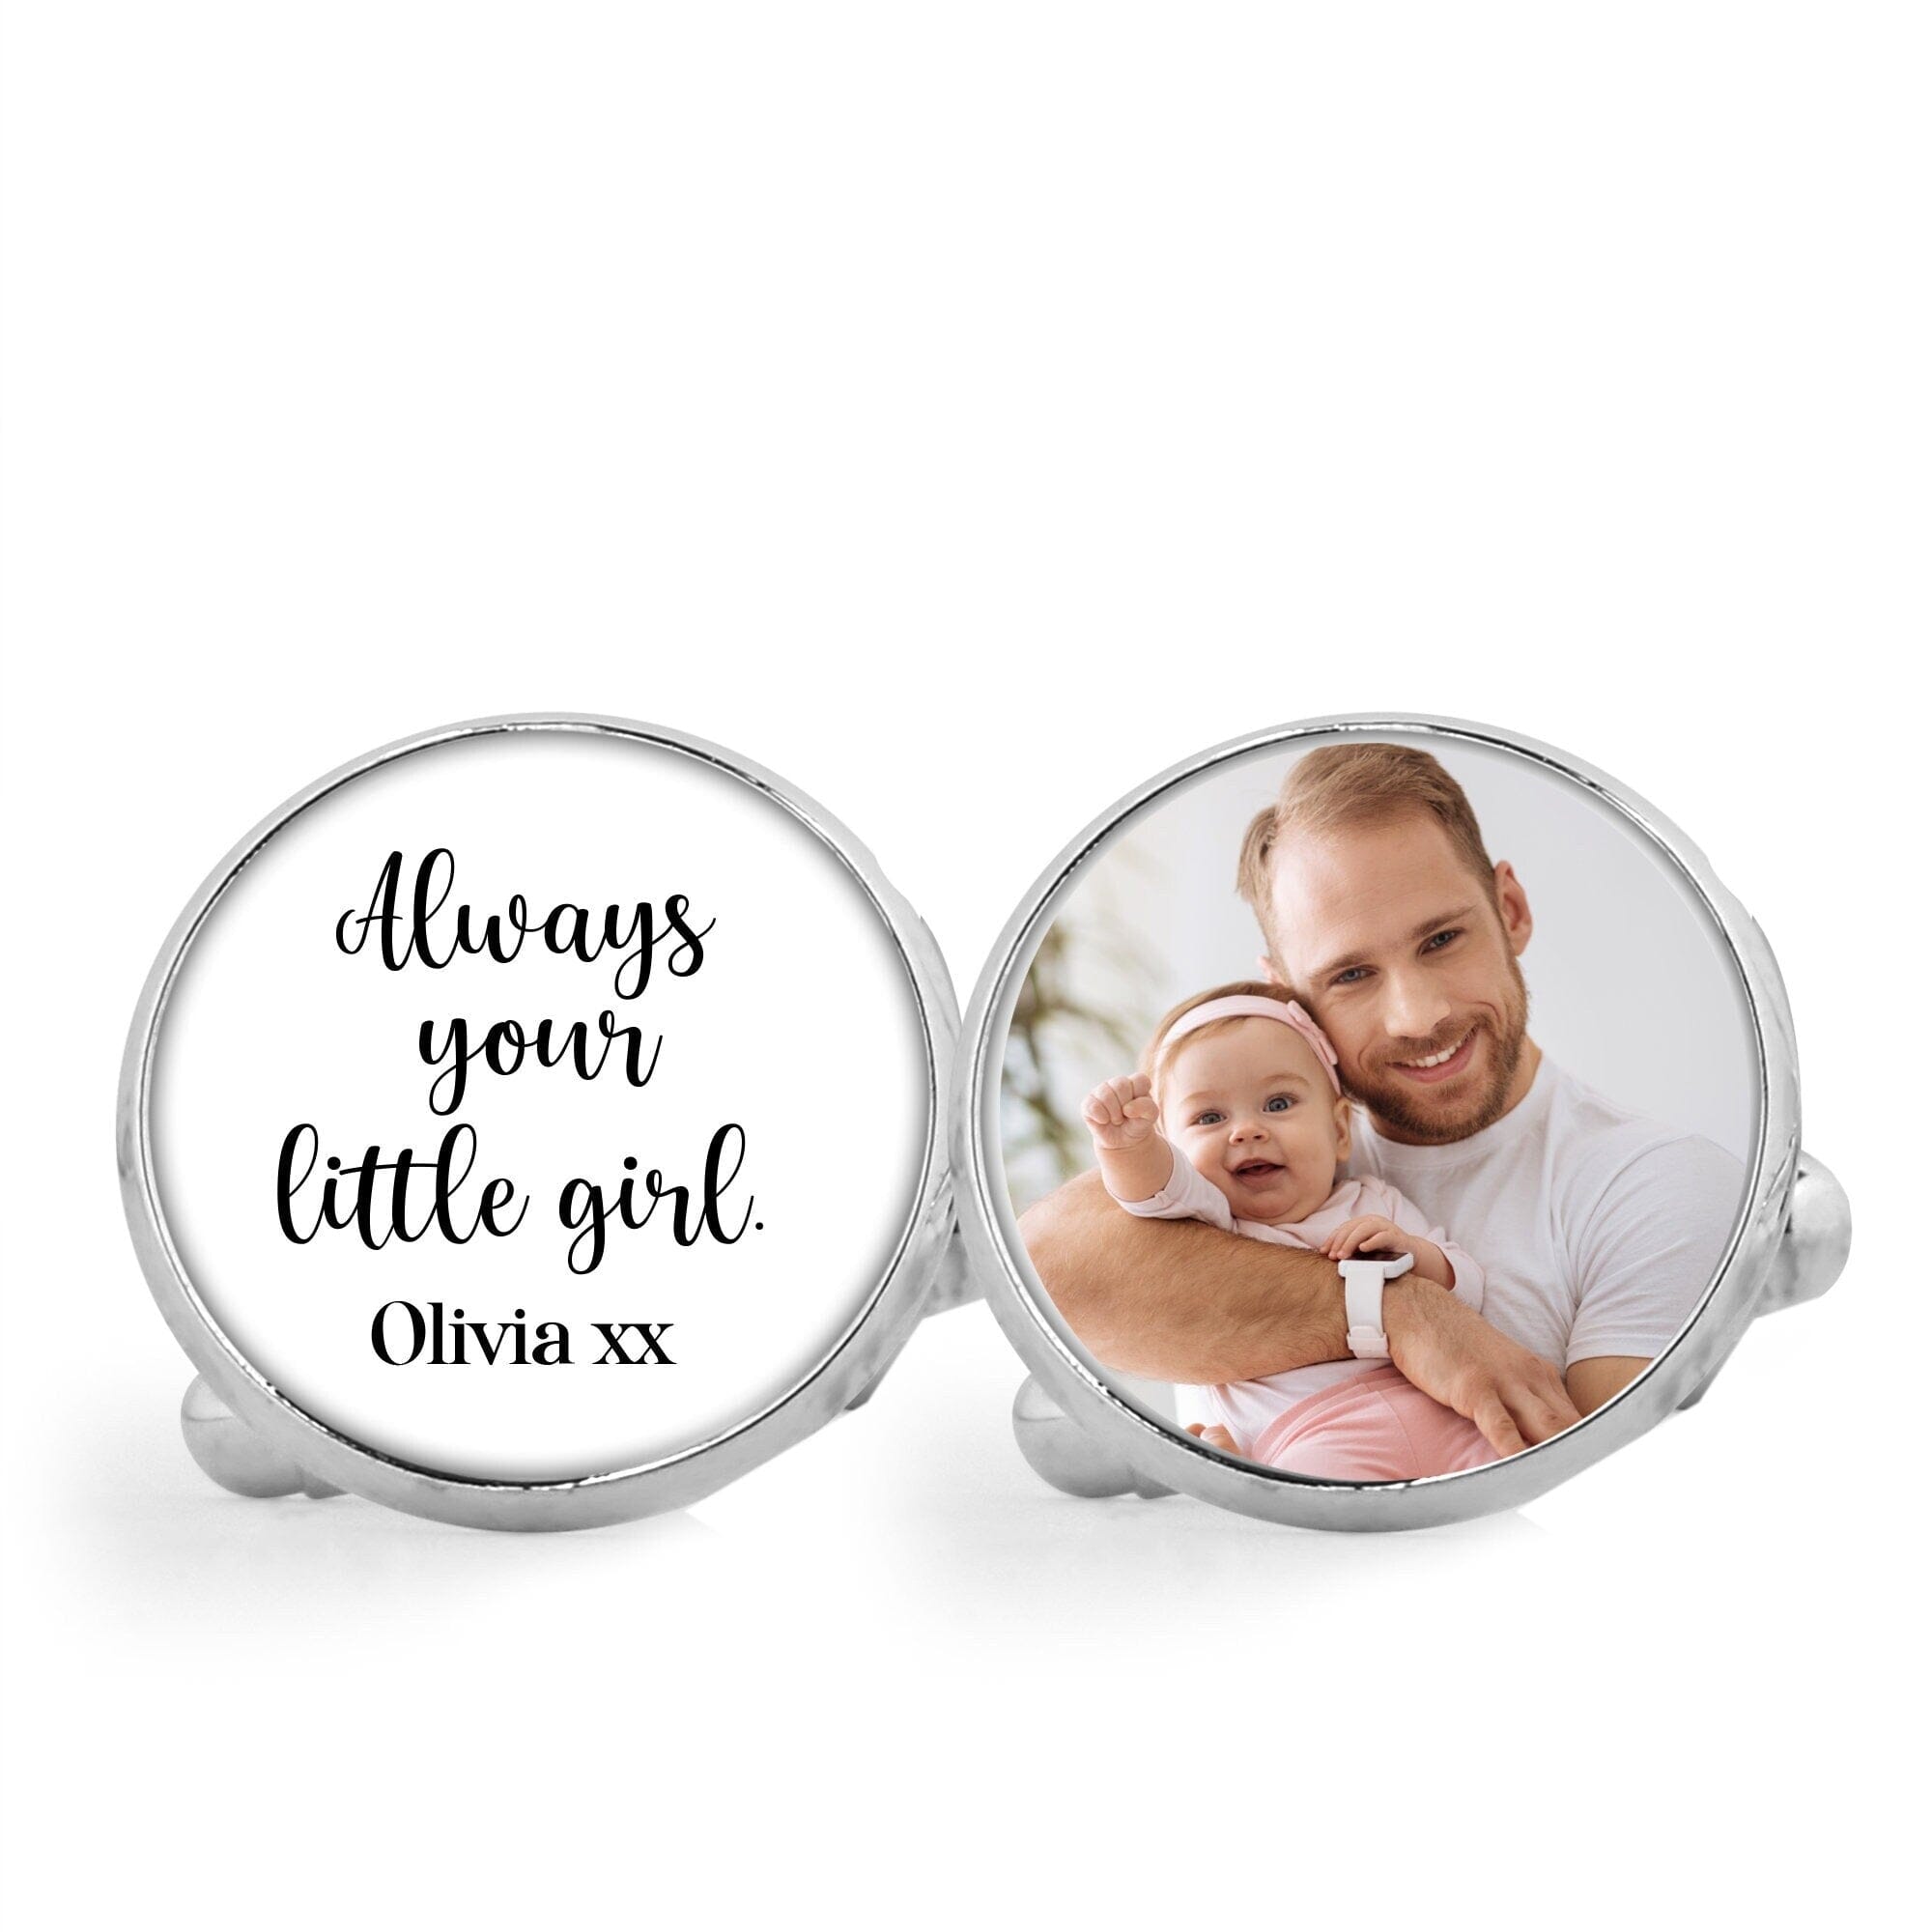 Cufflinks With Photo, Wedding Gift For Father Of The Bride, Wedding Cufflinks, Printed Cufflinks, Gift For Dad